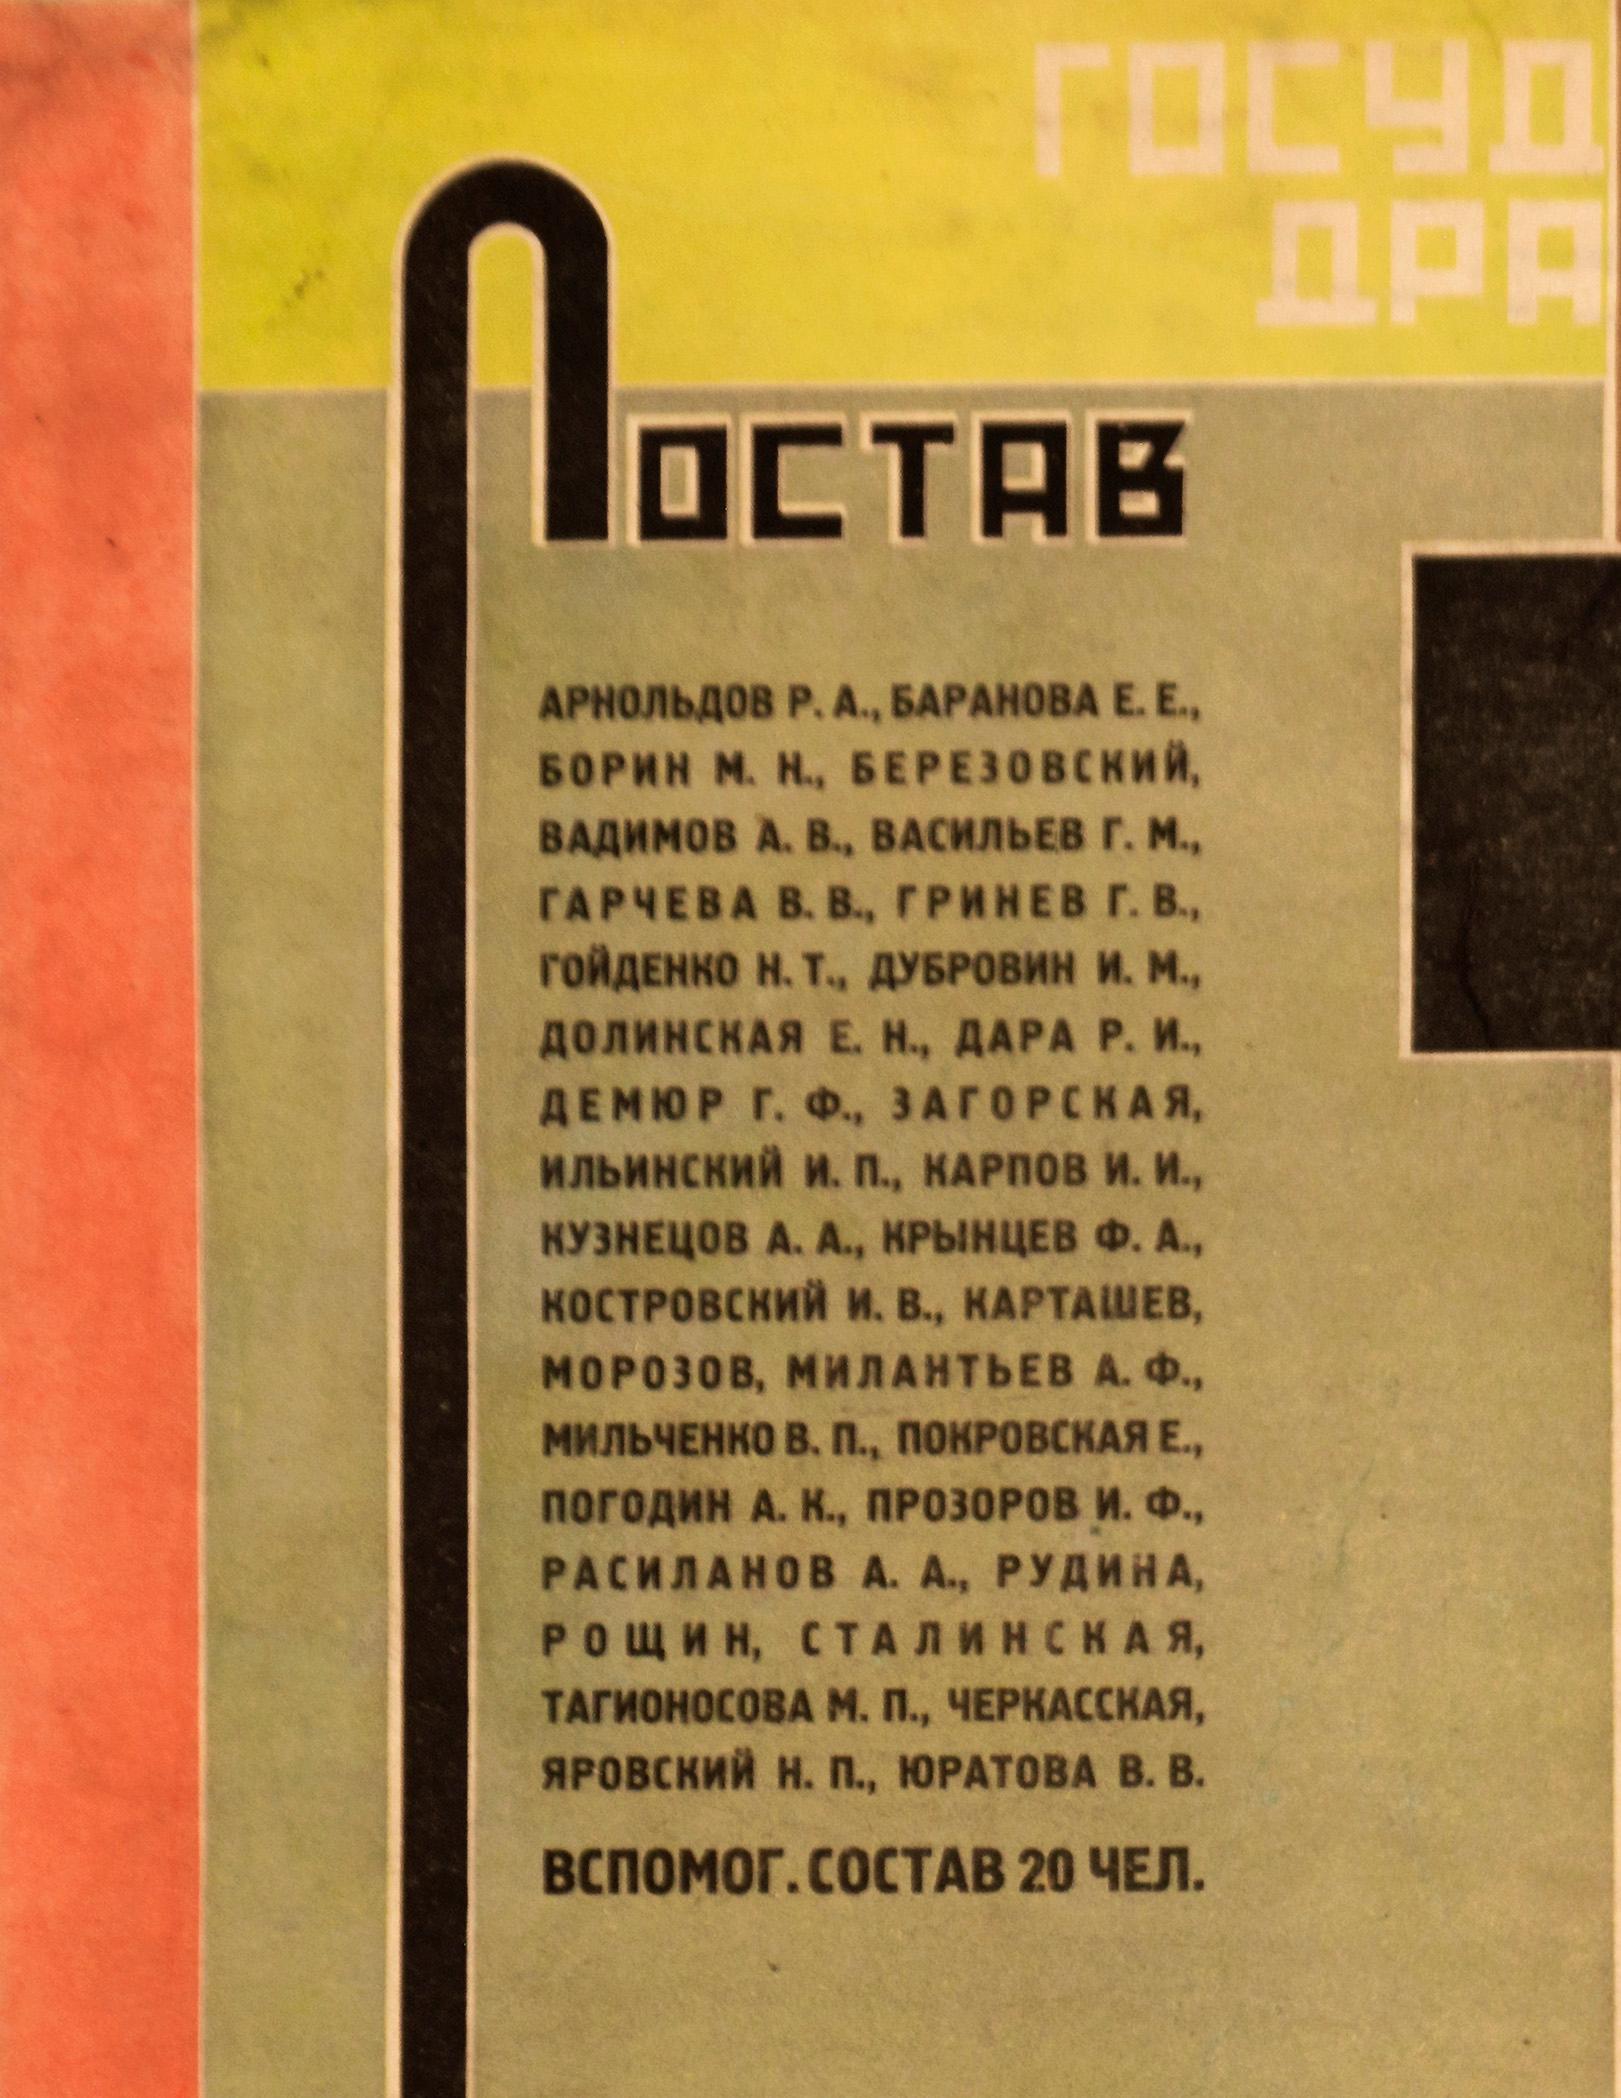 Other Original 1932 Russian Constructivist Typographic Theatre Poster by Lupach For Sale